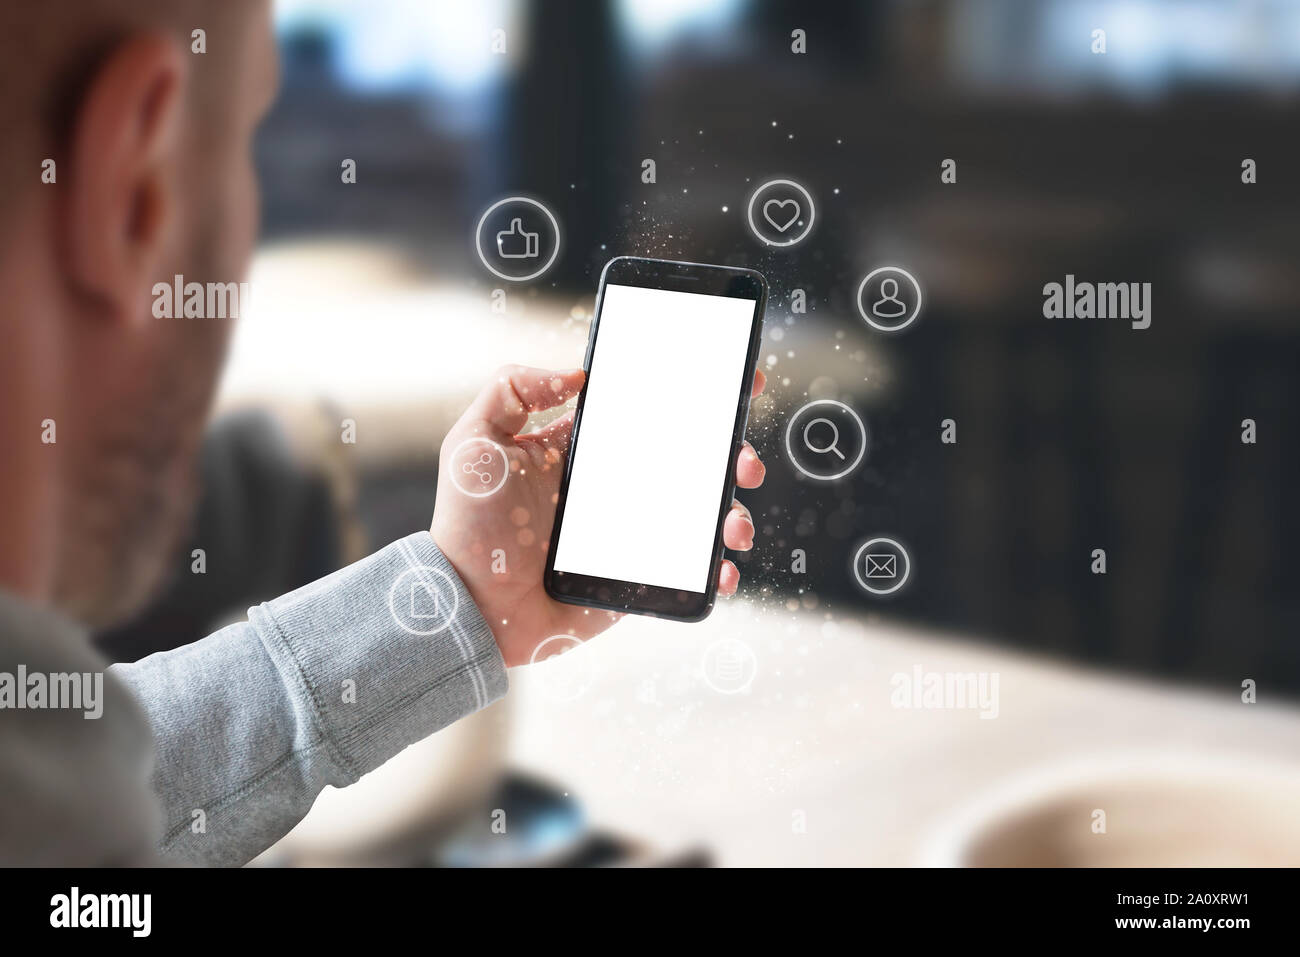 Phone mockup surrounded with social network icons concept. Stock Photo